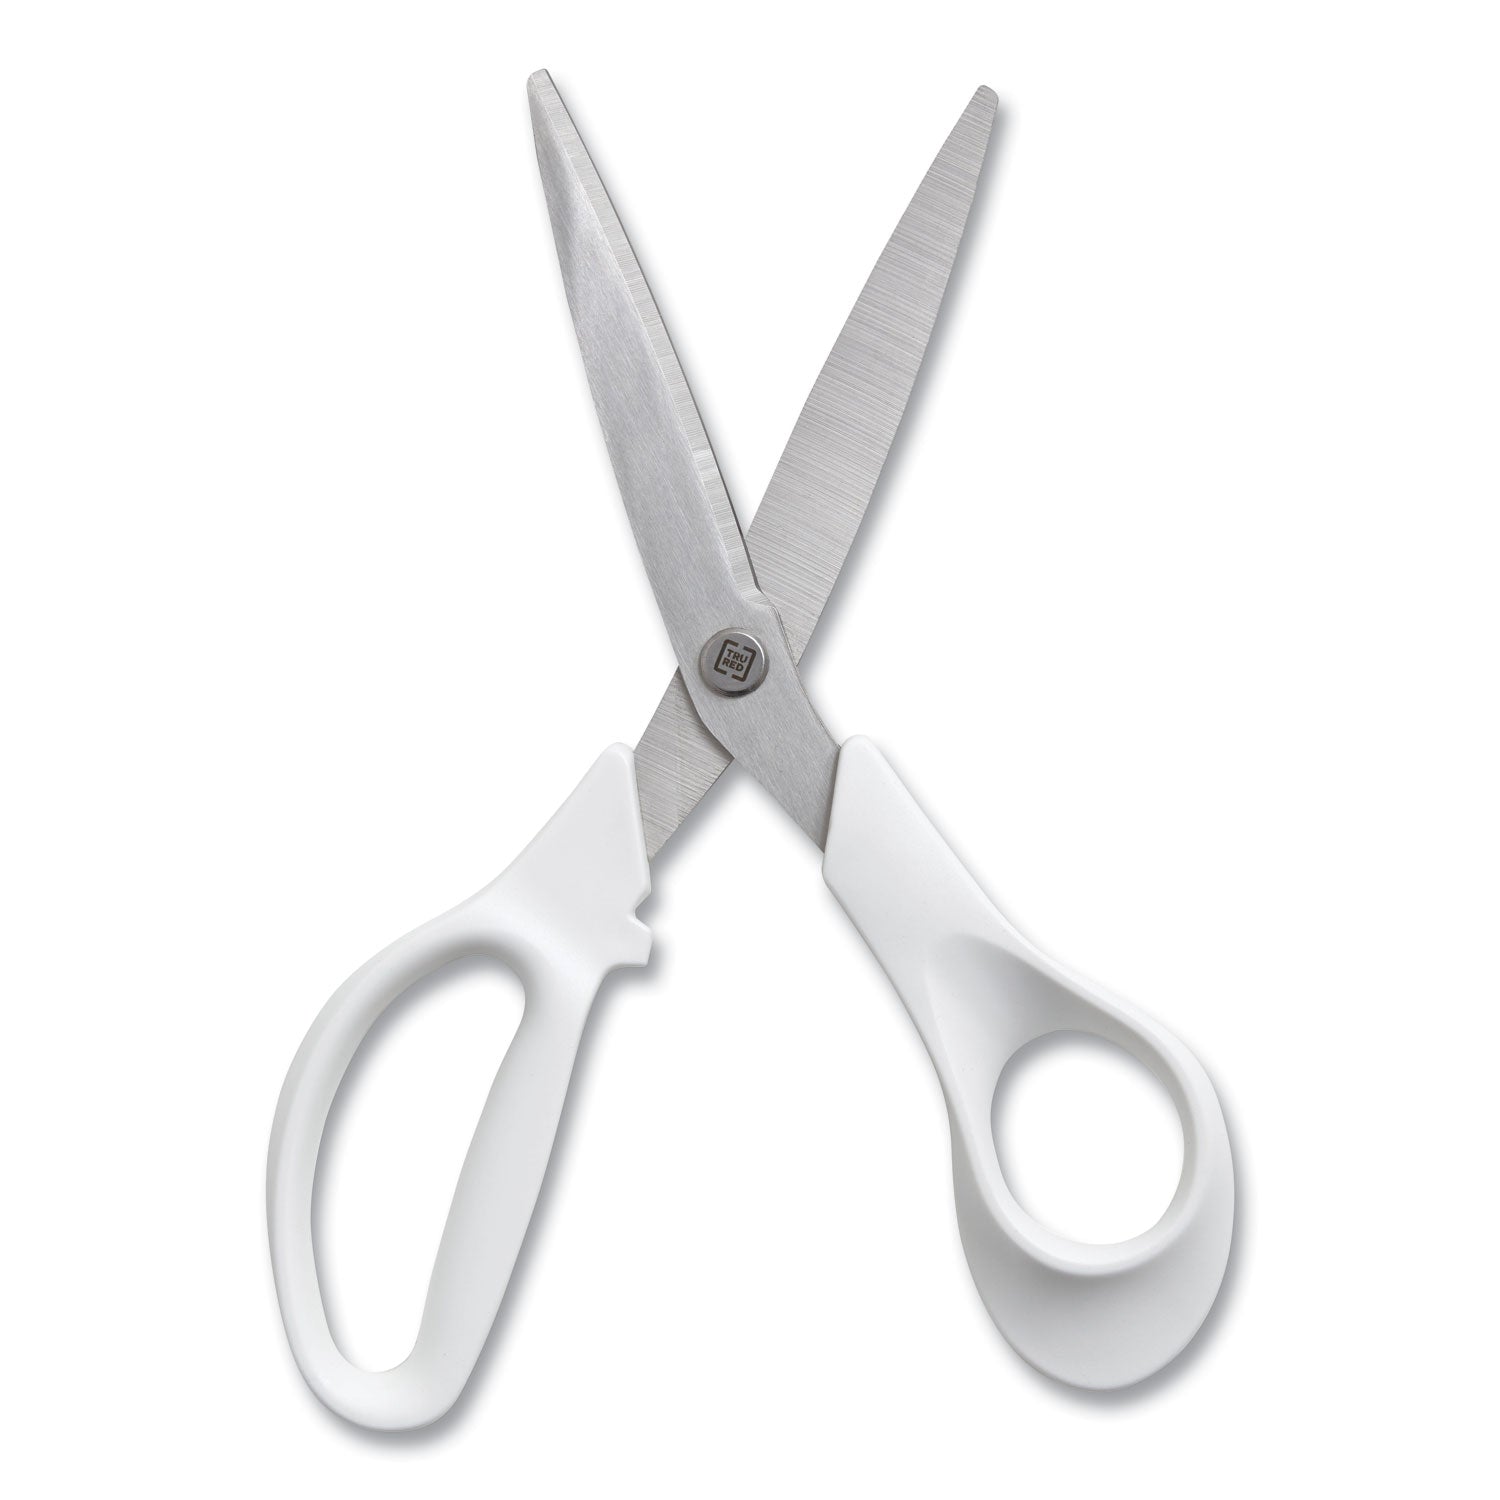 stainless-steel-scissors-8-long-358-cut-length-assorted-straight-handles-2-pack_tud24380494 - 4